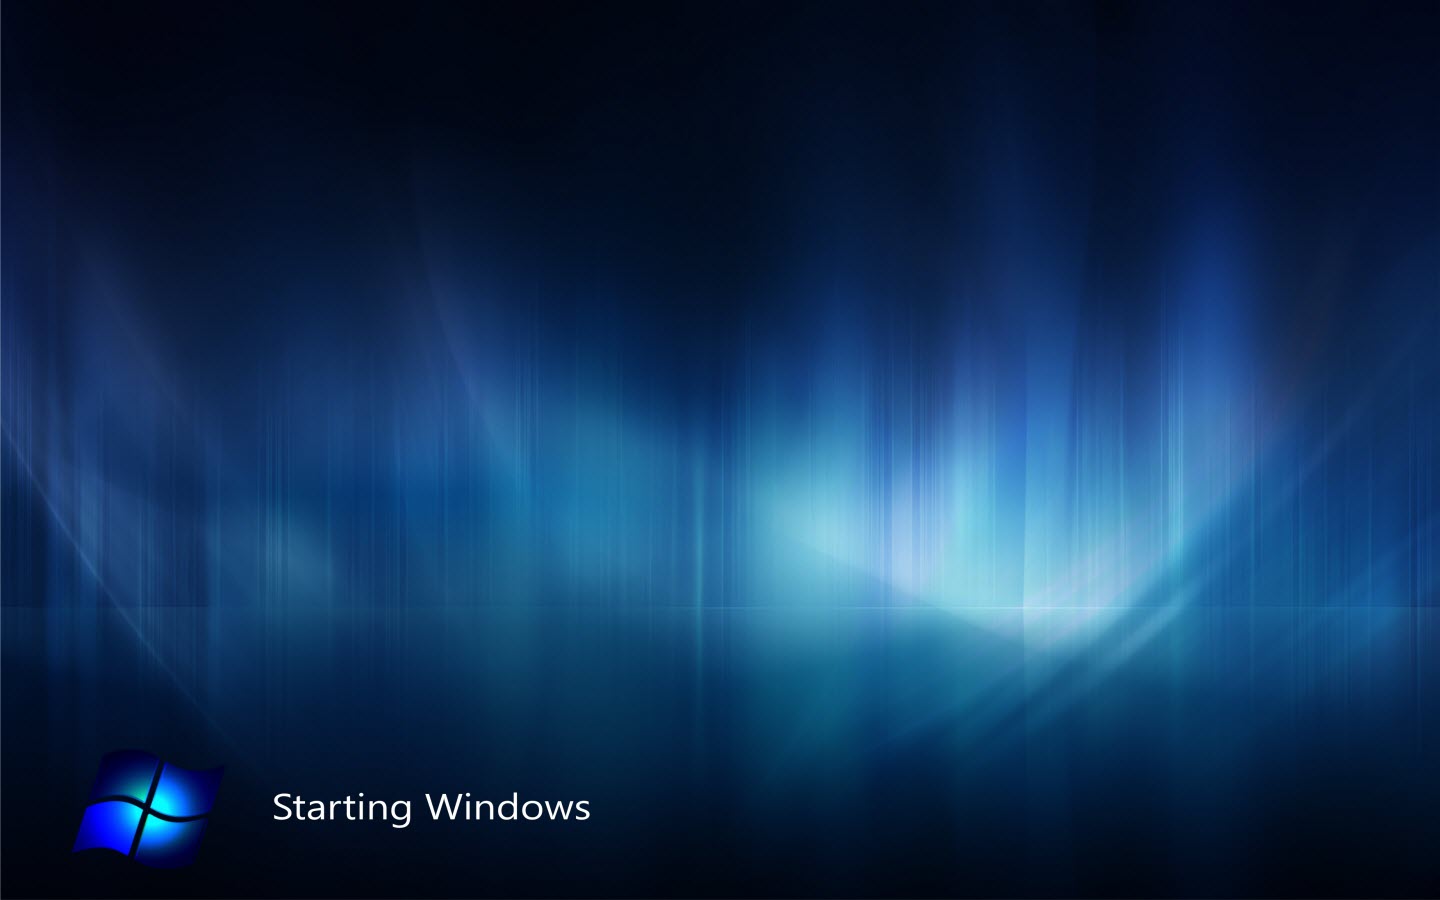 The First Wallpaper Are Windows Enjoy